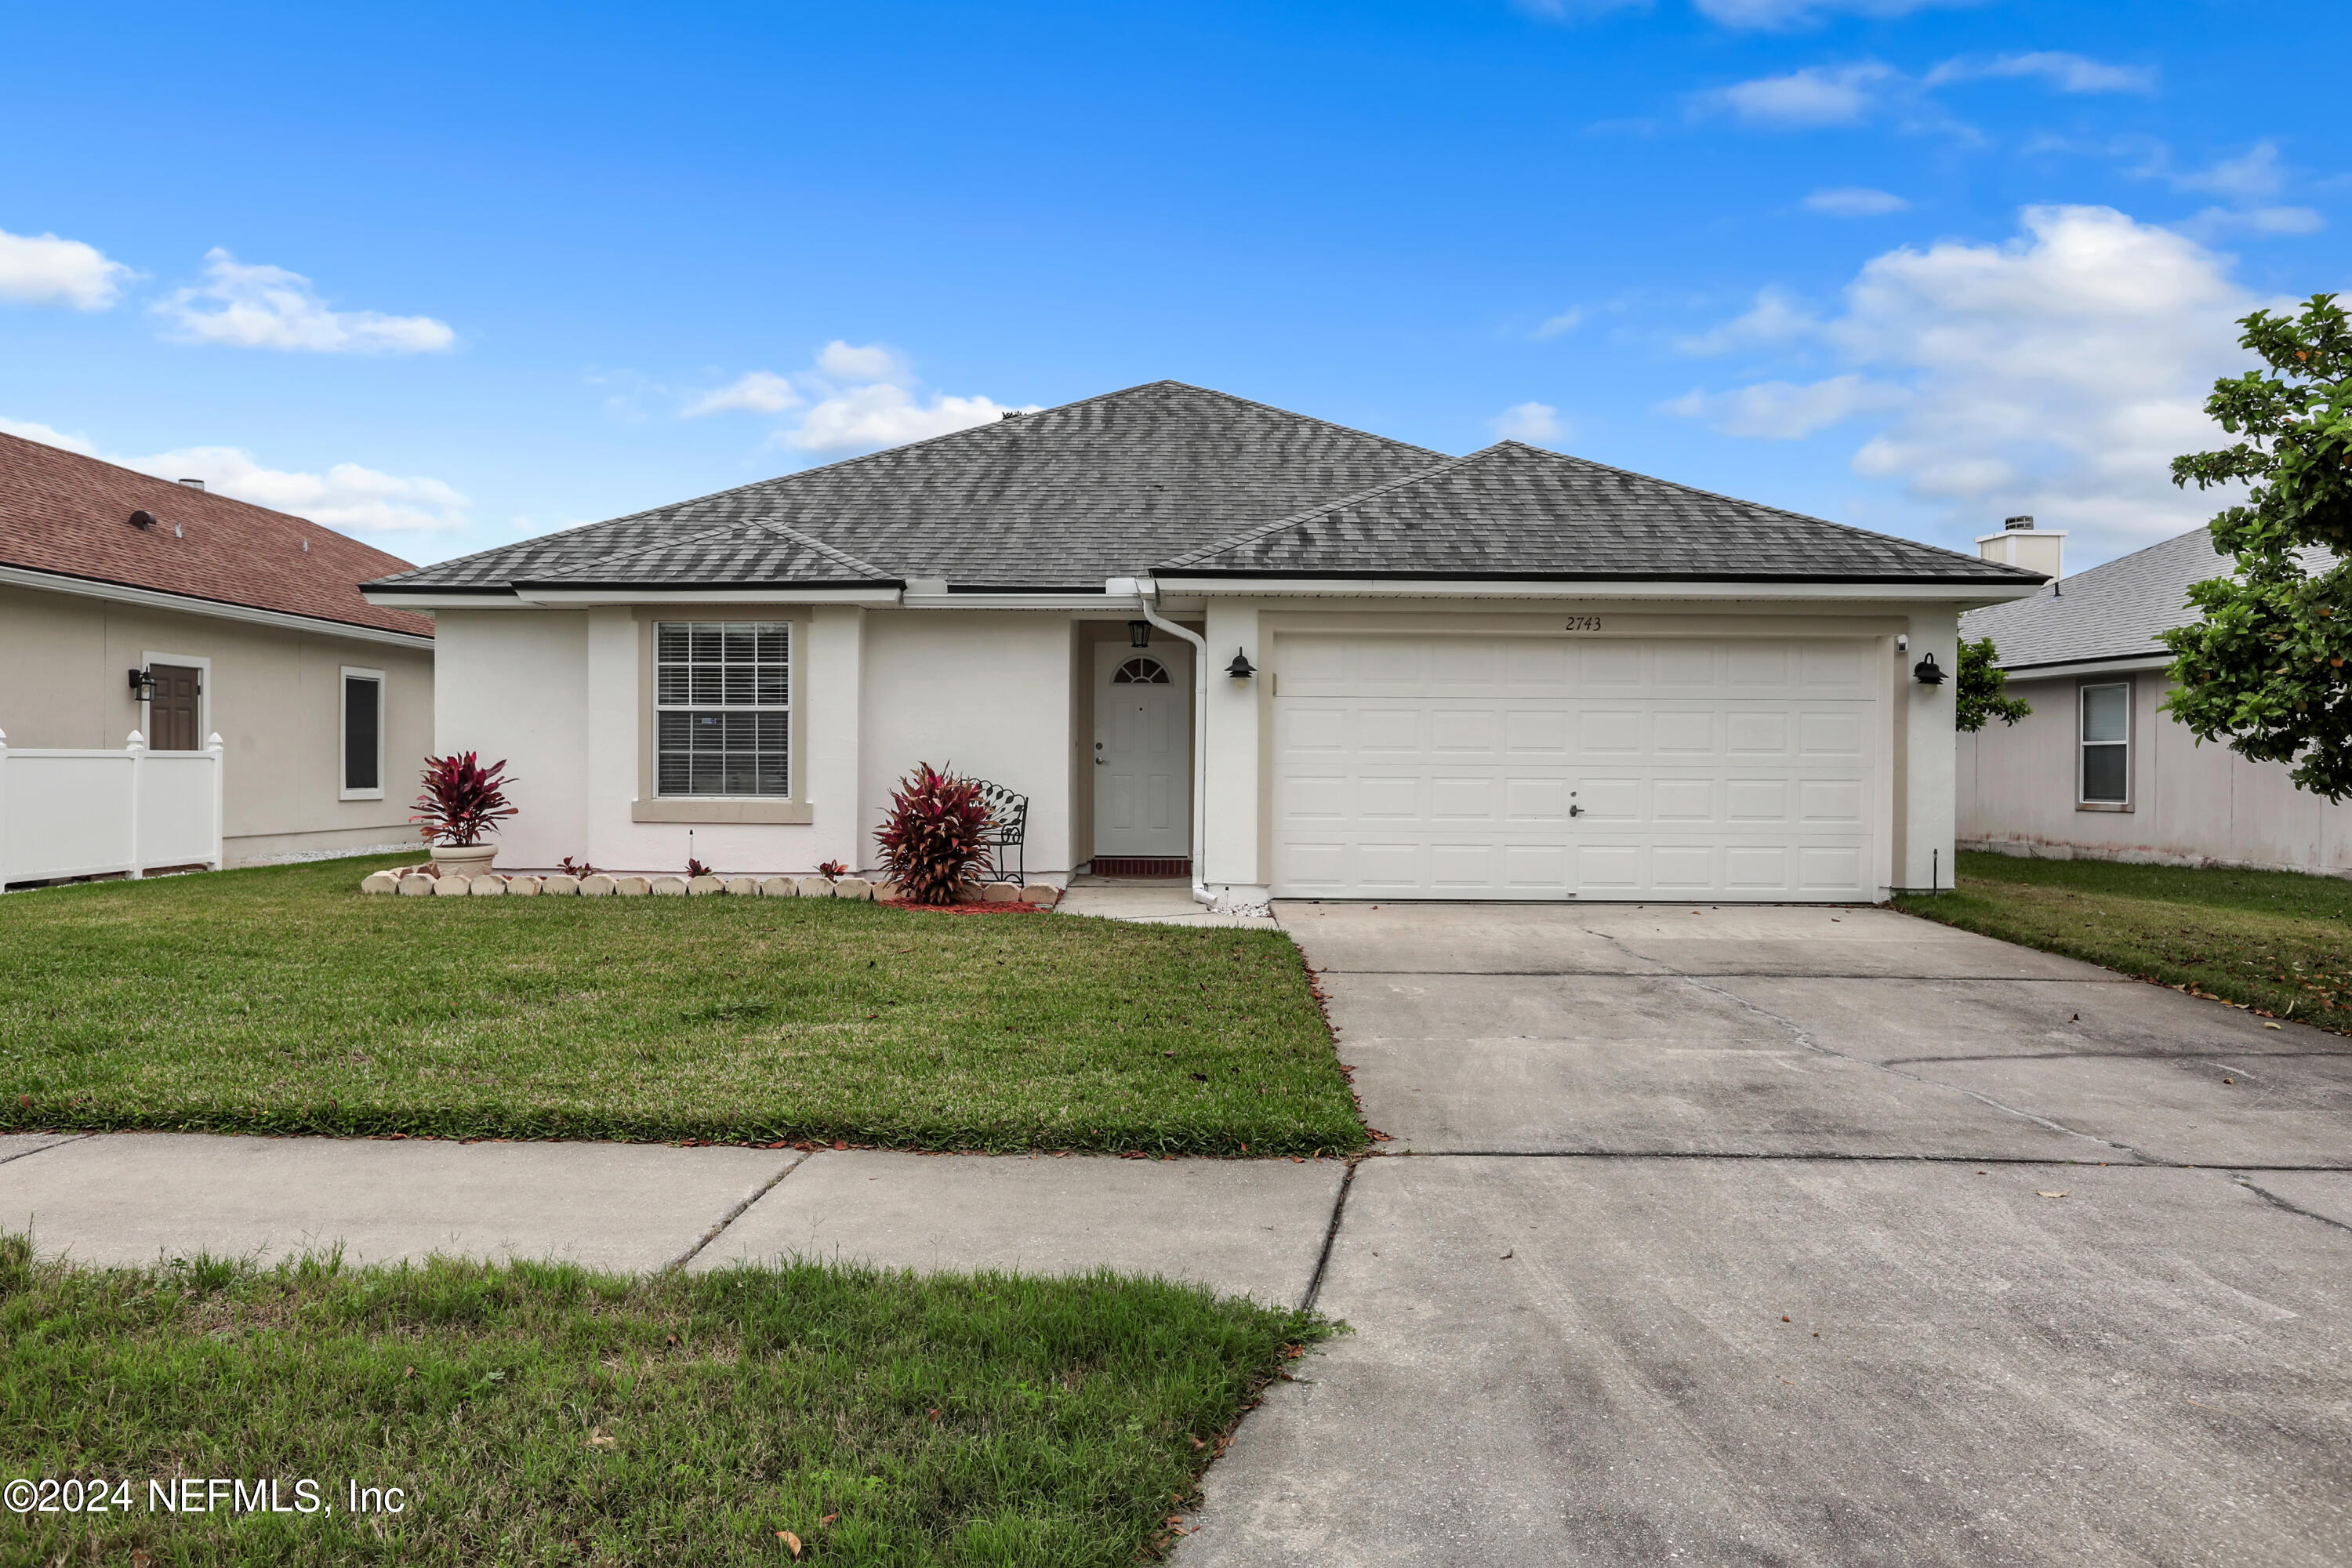 Green Cove Springs, FL home for sale located at 2743 Creek Ridge Drive, Green Cove Springs, FL 32043